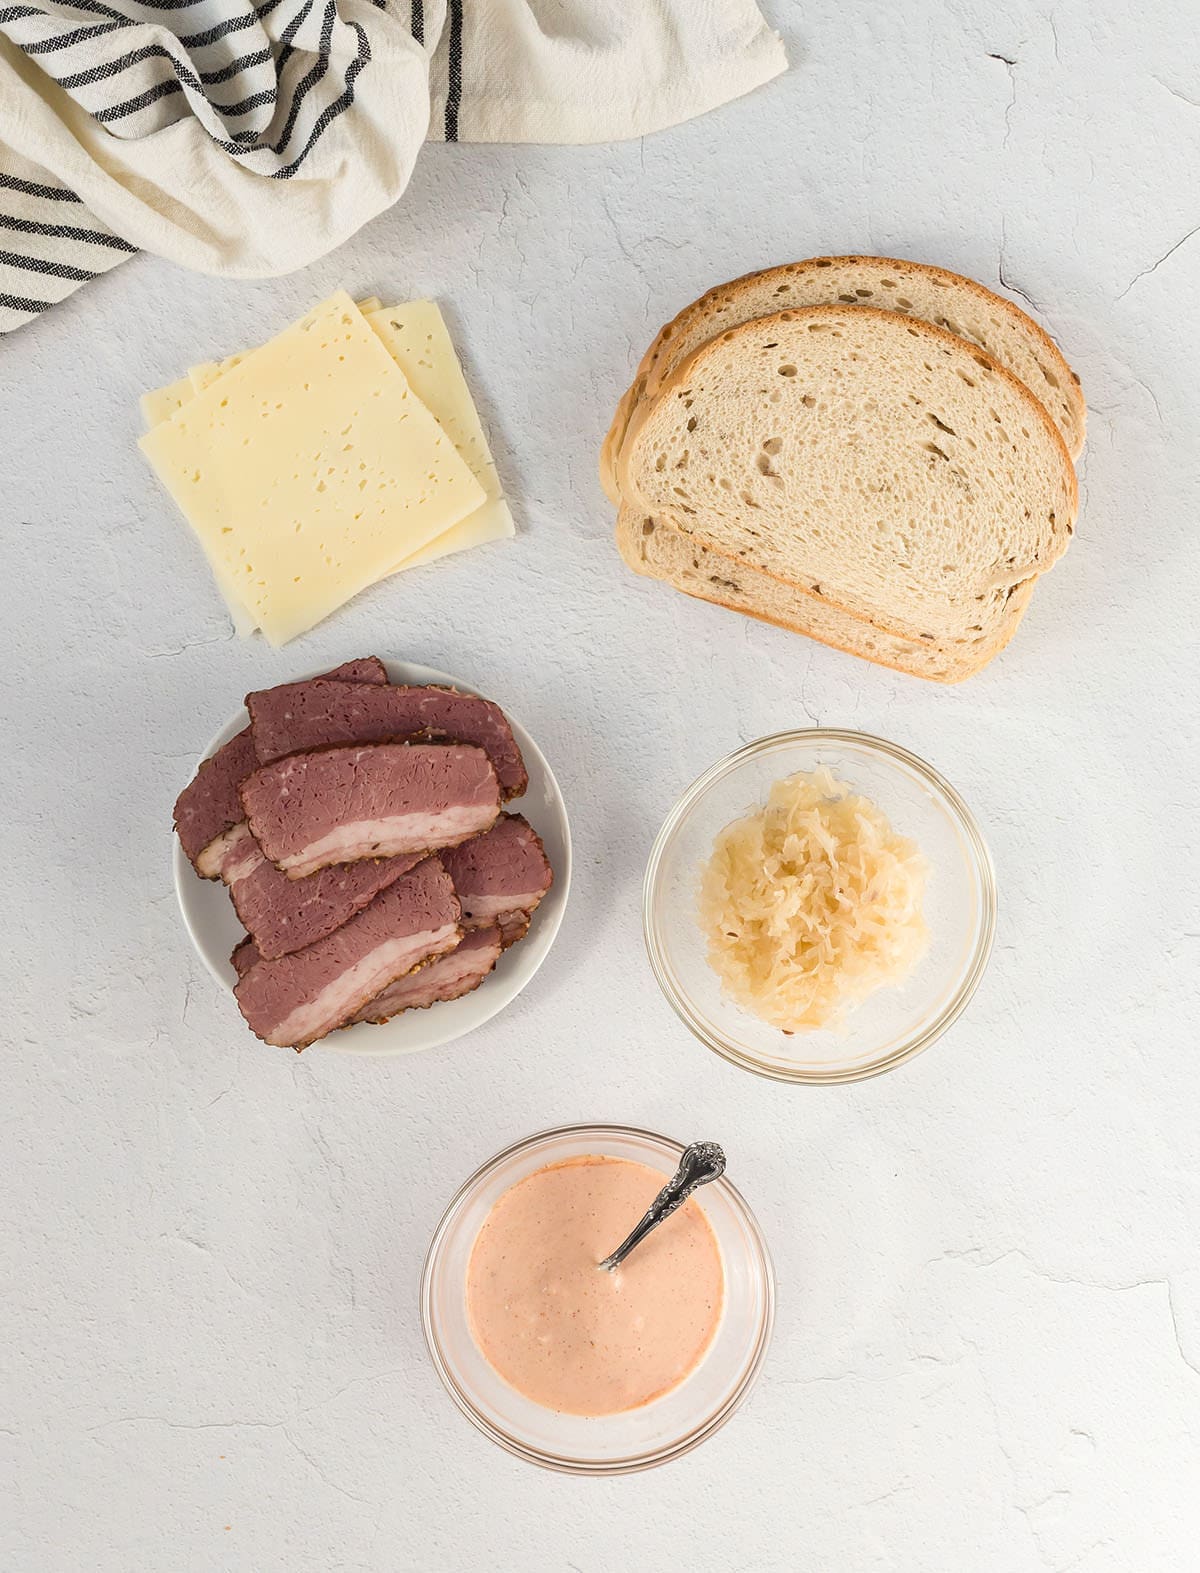 Russian dressing in a clear bowl next to bread, cheese and sliced meat.